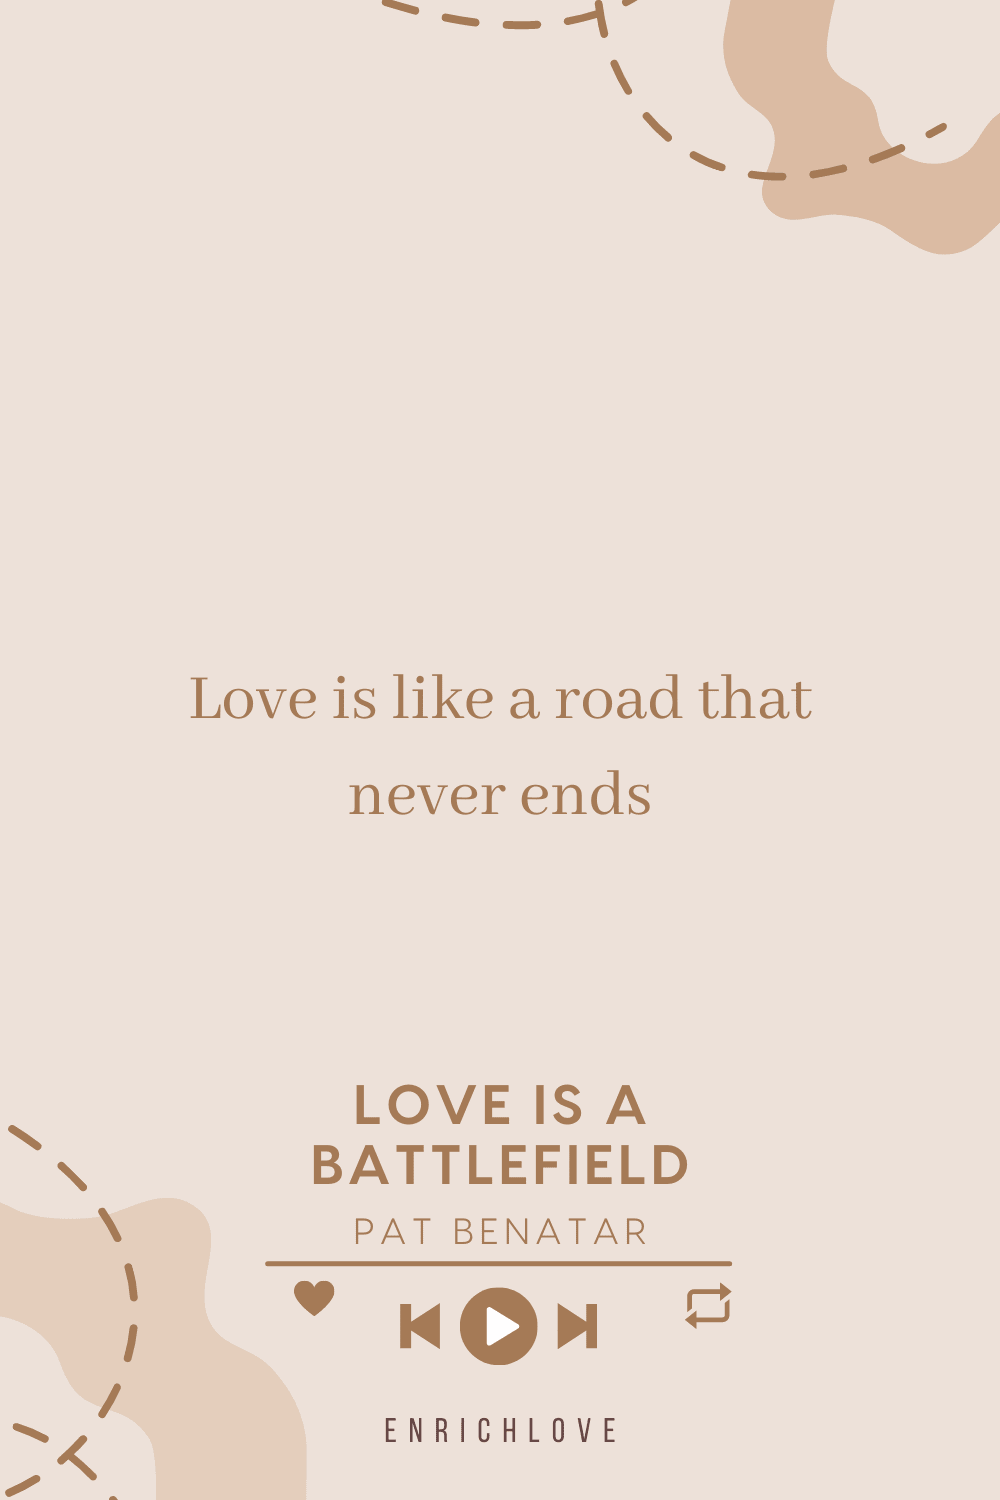 Love is like a road that never ends